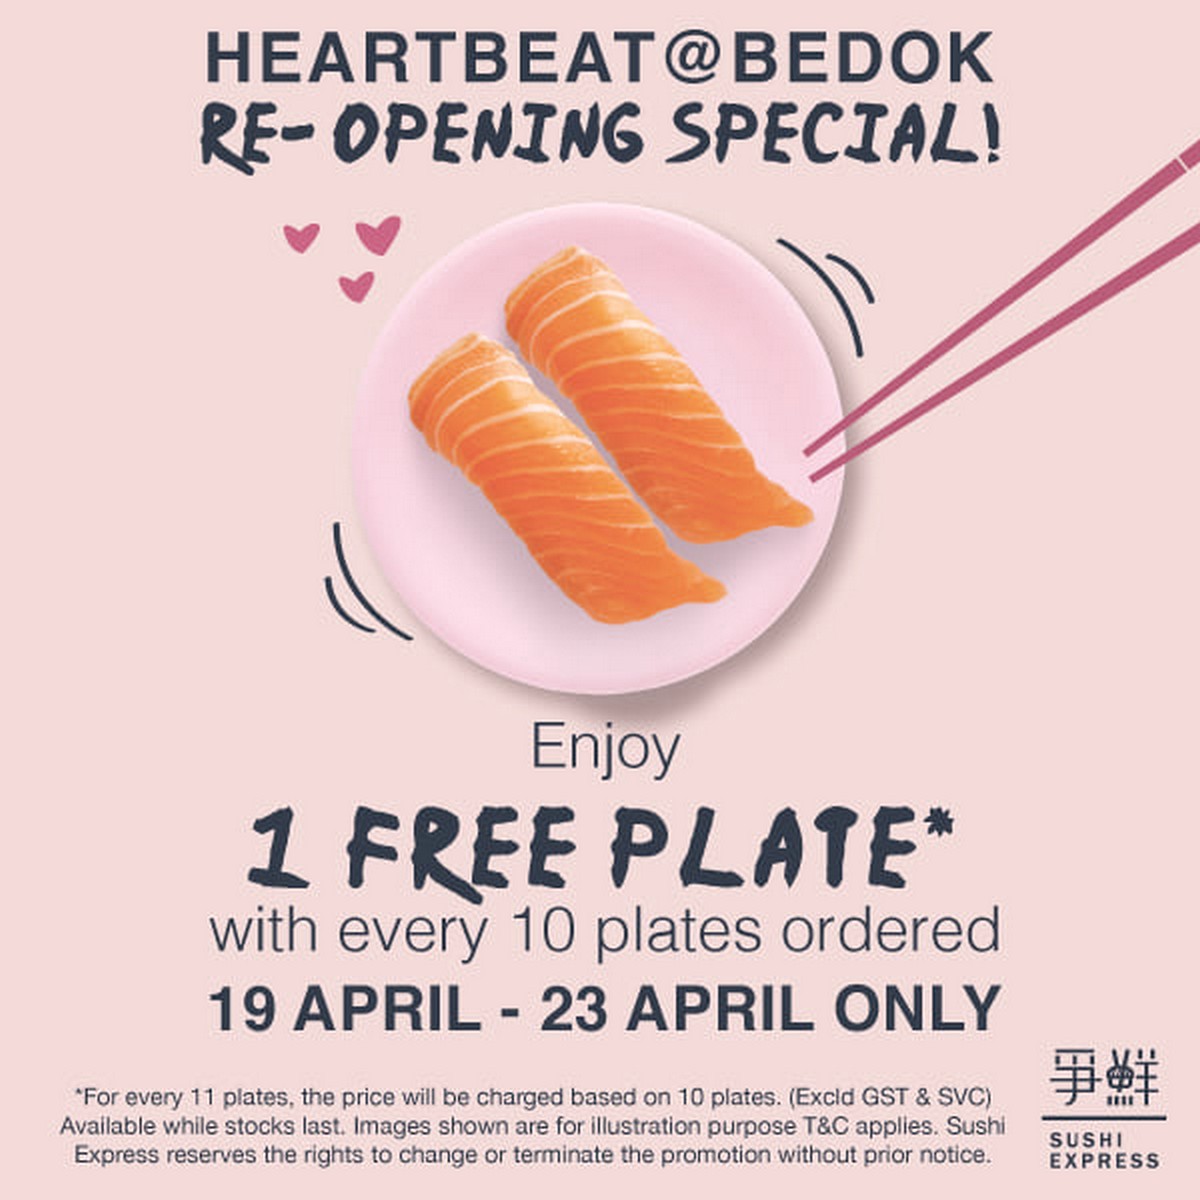 Sushi-Express-FREE-1-Plate-of-Sushi-2021-Singapore-Japanese-Food-Promotion-001 19-23 Apr 2021: Sushi Express Re-Opening Special Promotion at Heartbeat @ Bedok